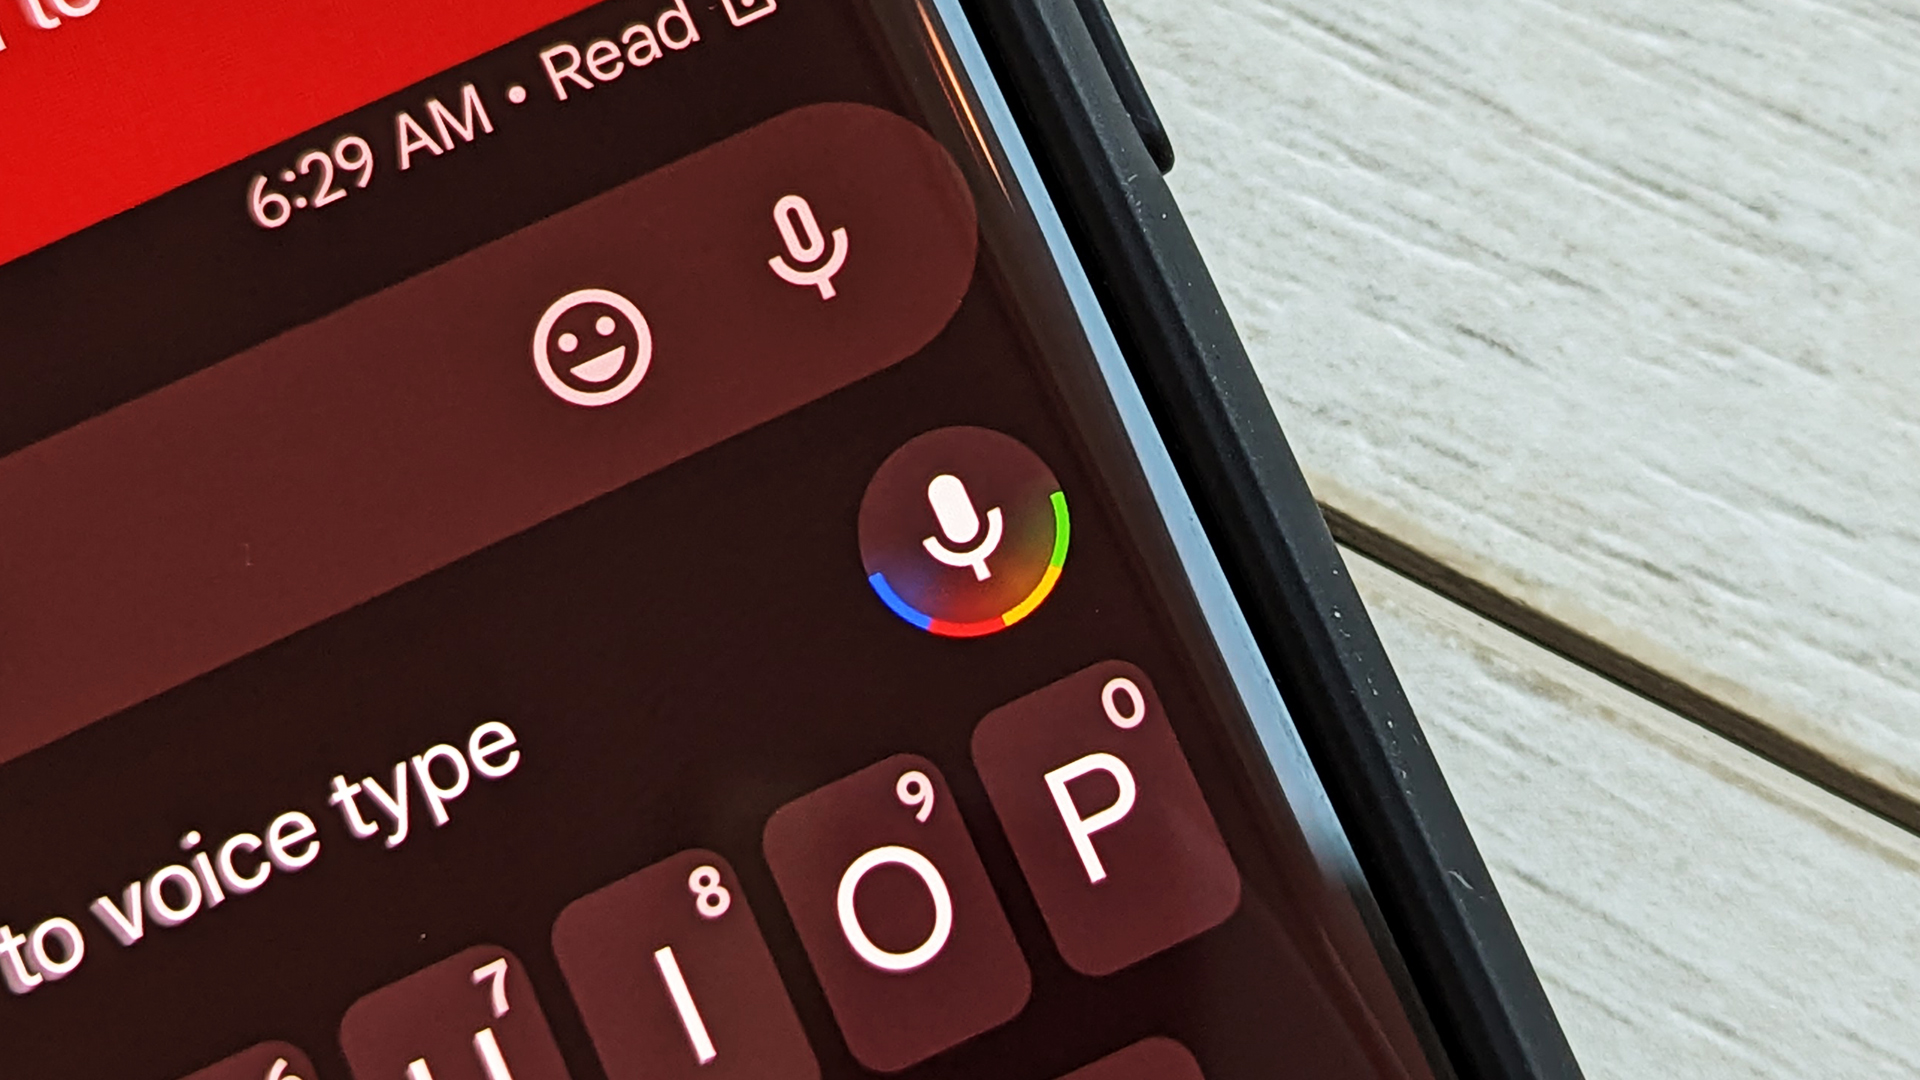 On the voice device to type with the Google Assistant